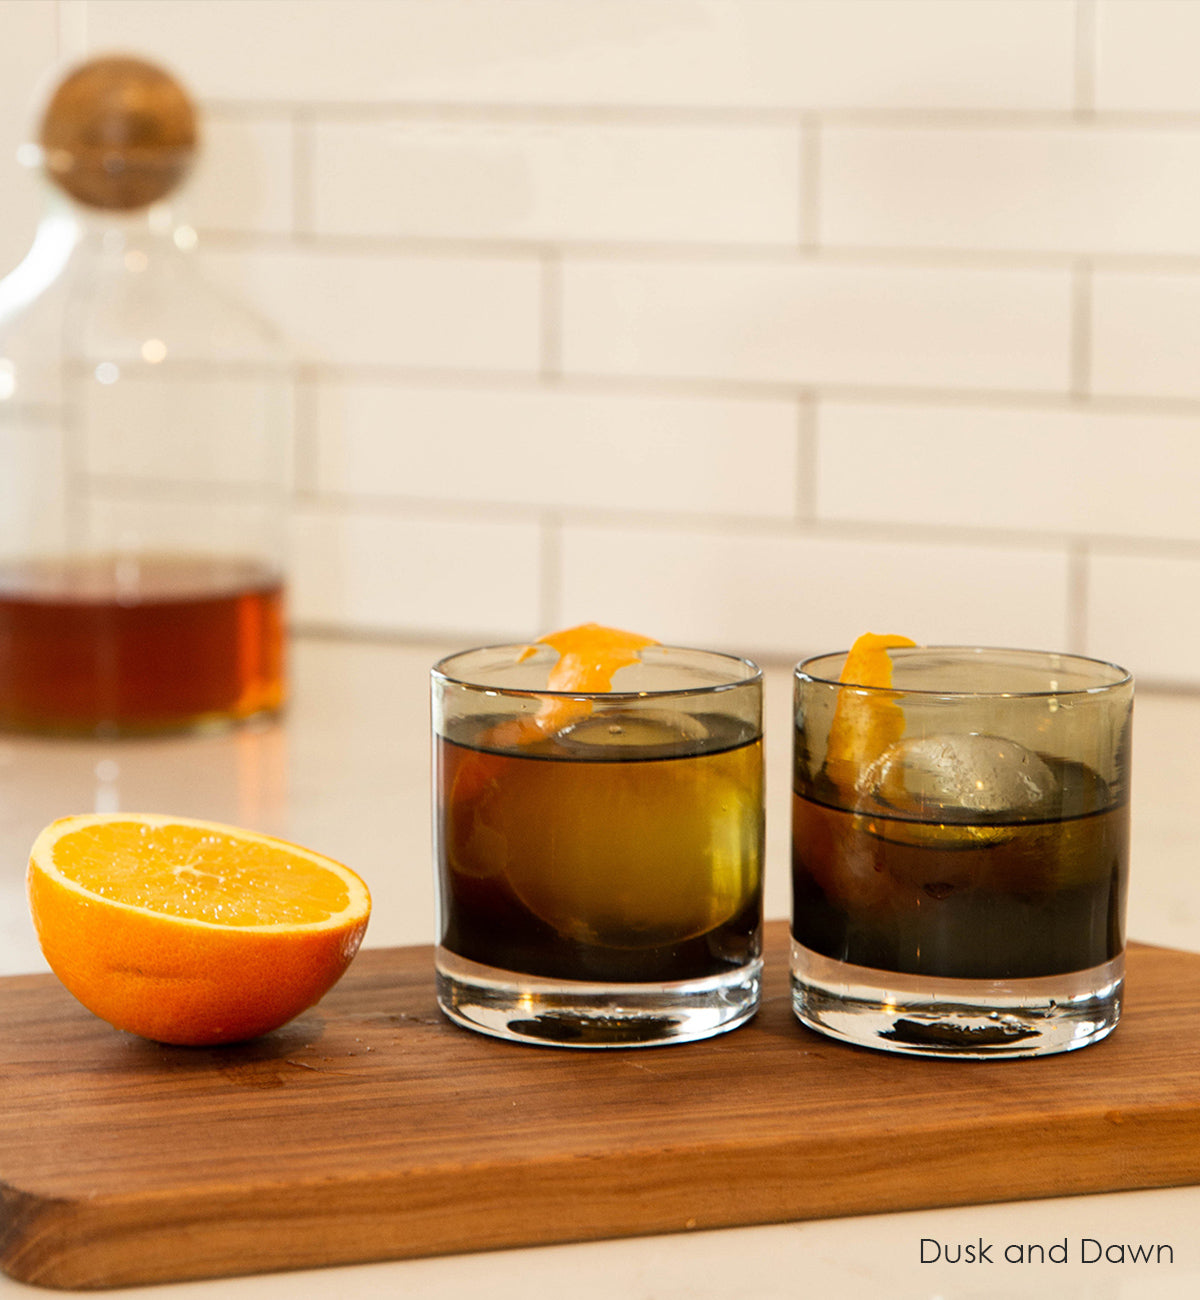 two Dusk and Dawn rockers, dark gray hand-blown glass lowball drinking glasses with ice, liquid and orange peel inside. sitting on a wood cutting board next to an orange with white kitchen background.